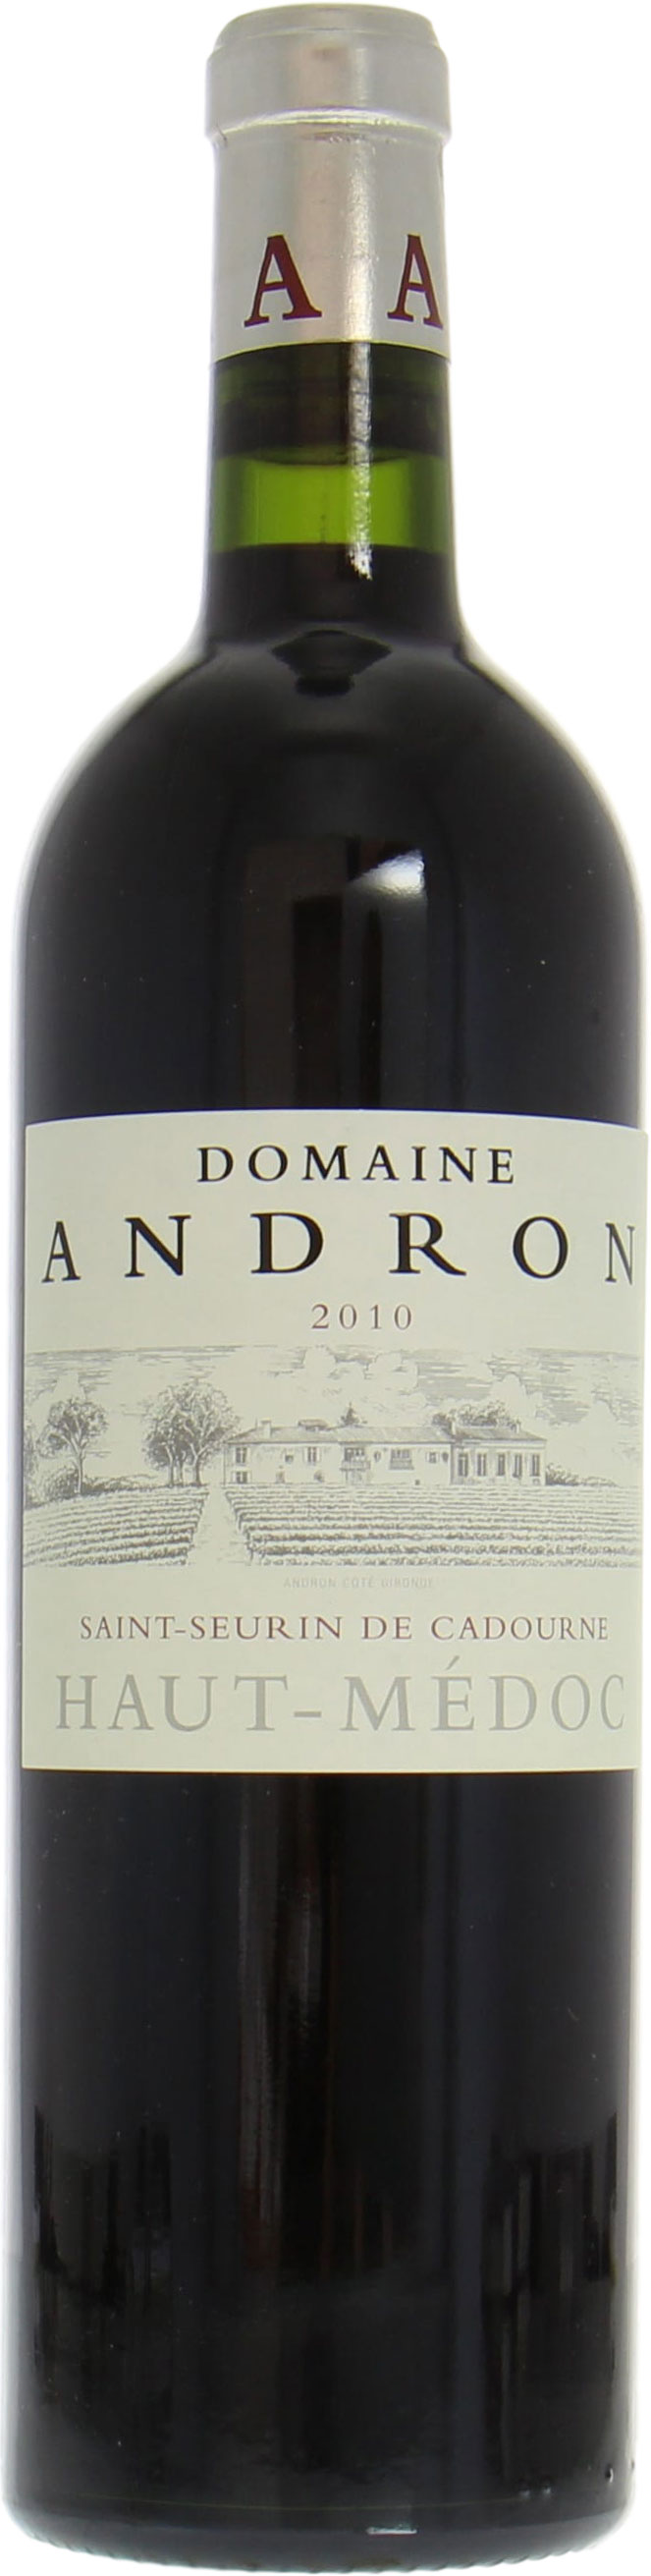 Domaine Andron - Domaine Andron 2010 From Original Wooden Case